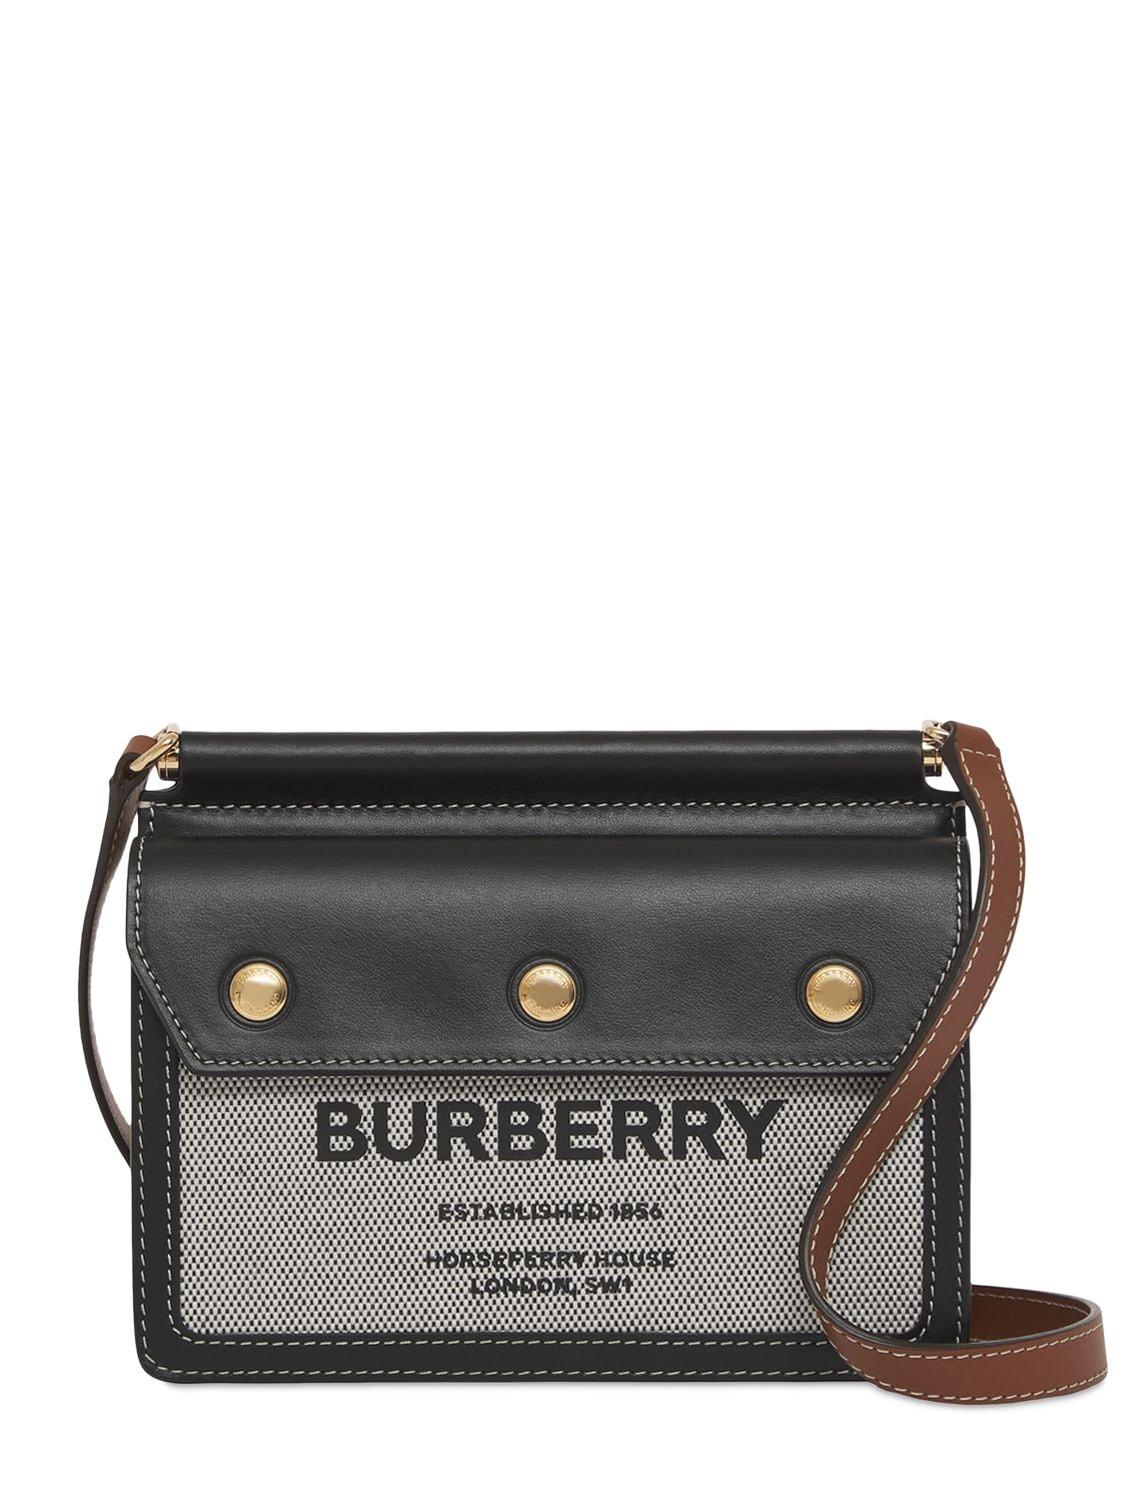 Burberry Baby Title Pocket Canvas & Leather Bag in Black | Lyst